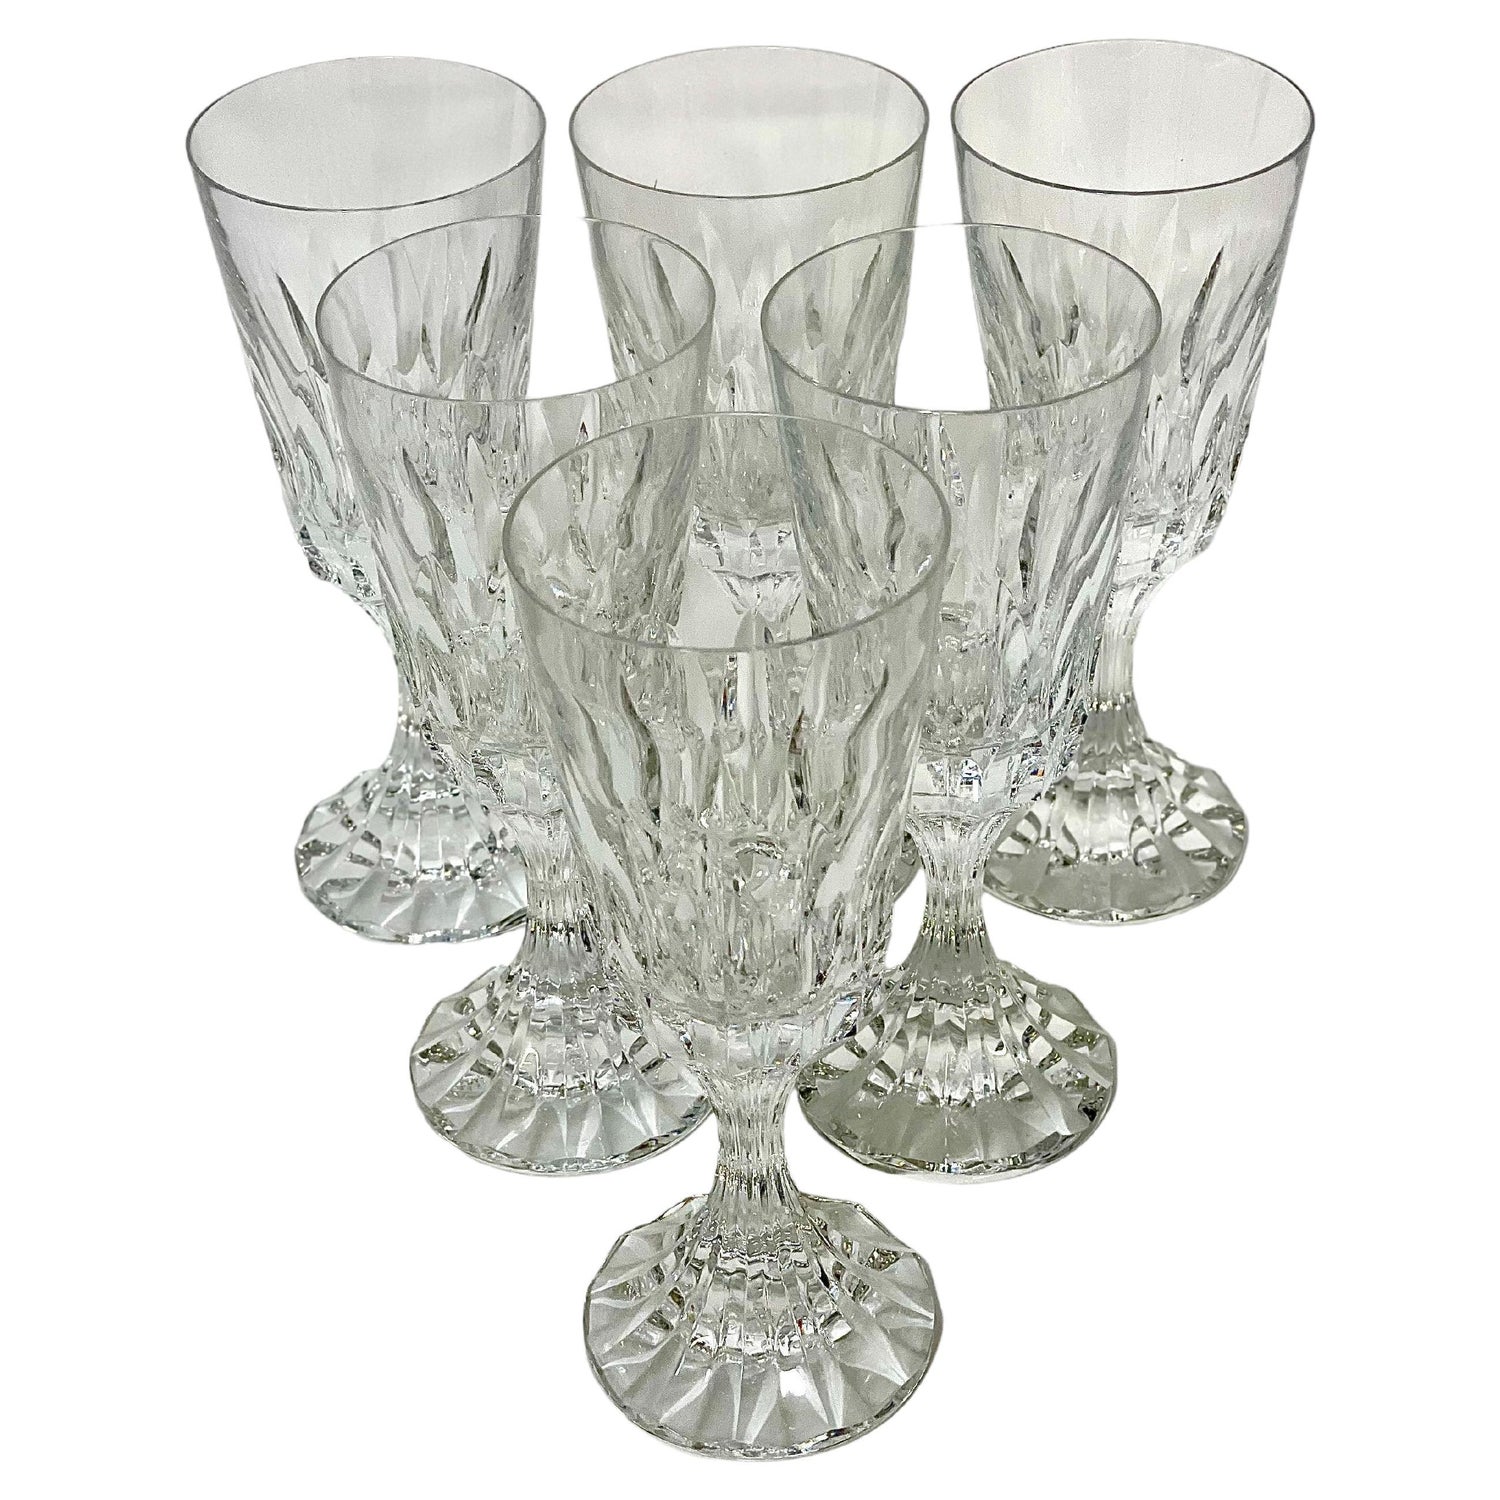 https://a.1stdibscdn.com/a-sumptuous-set-of-six-baccarat-crystal-wine-glasses-for-sale/f_64192/f_331771921678219522738/f_33177192_1678219523884_bg_processed.jpg?width=1500